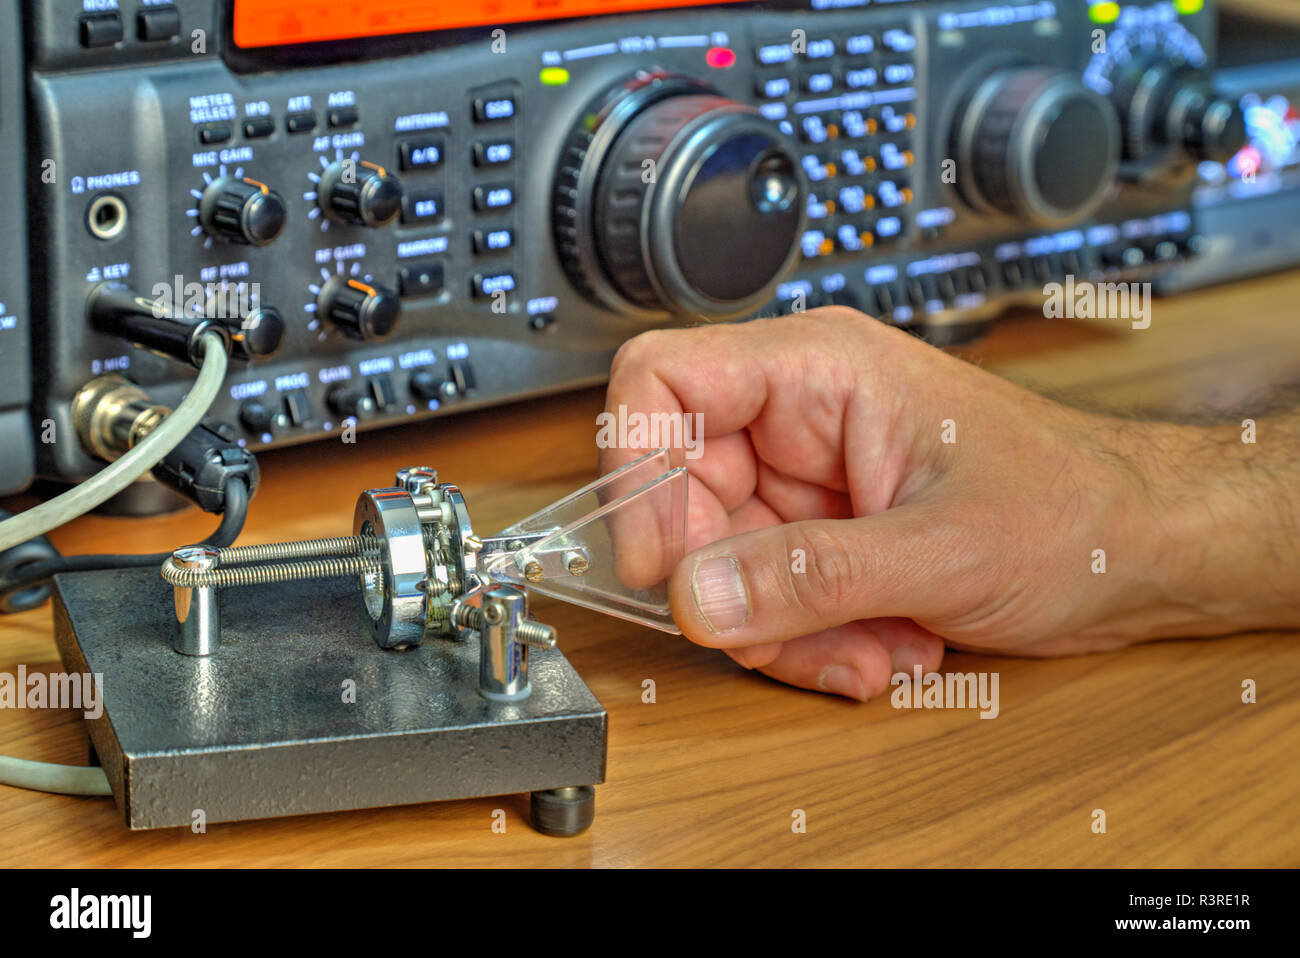 Modern high frequency radio amateur transceiver closeup Stock Photo